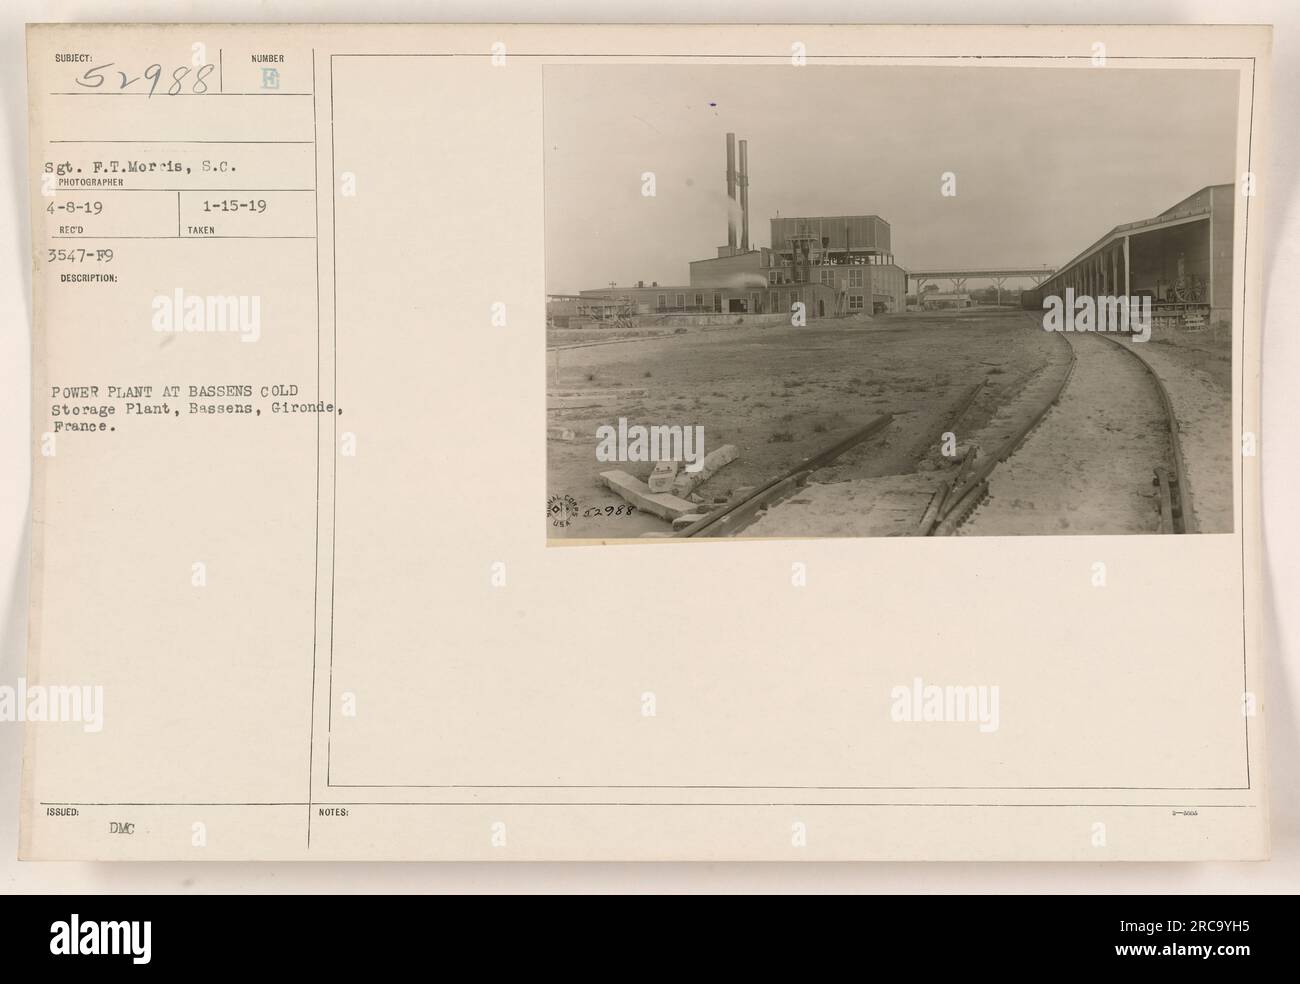 'Sgt. F.T. Morris, S.C. photographed the power plant at Bassens, Gironde, France on April 8, 1919. The image is part of the DMC (Damaged and unclassified references) records, issued on January 15, 1919. The photo shows the Cold Storage Plant at Bassens, Gironde, France. Additional notes indicate the file number as 2012 22988.' Stock Photo